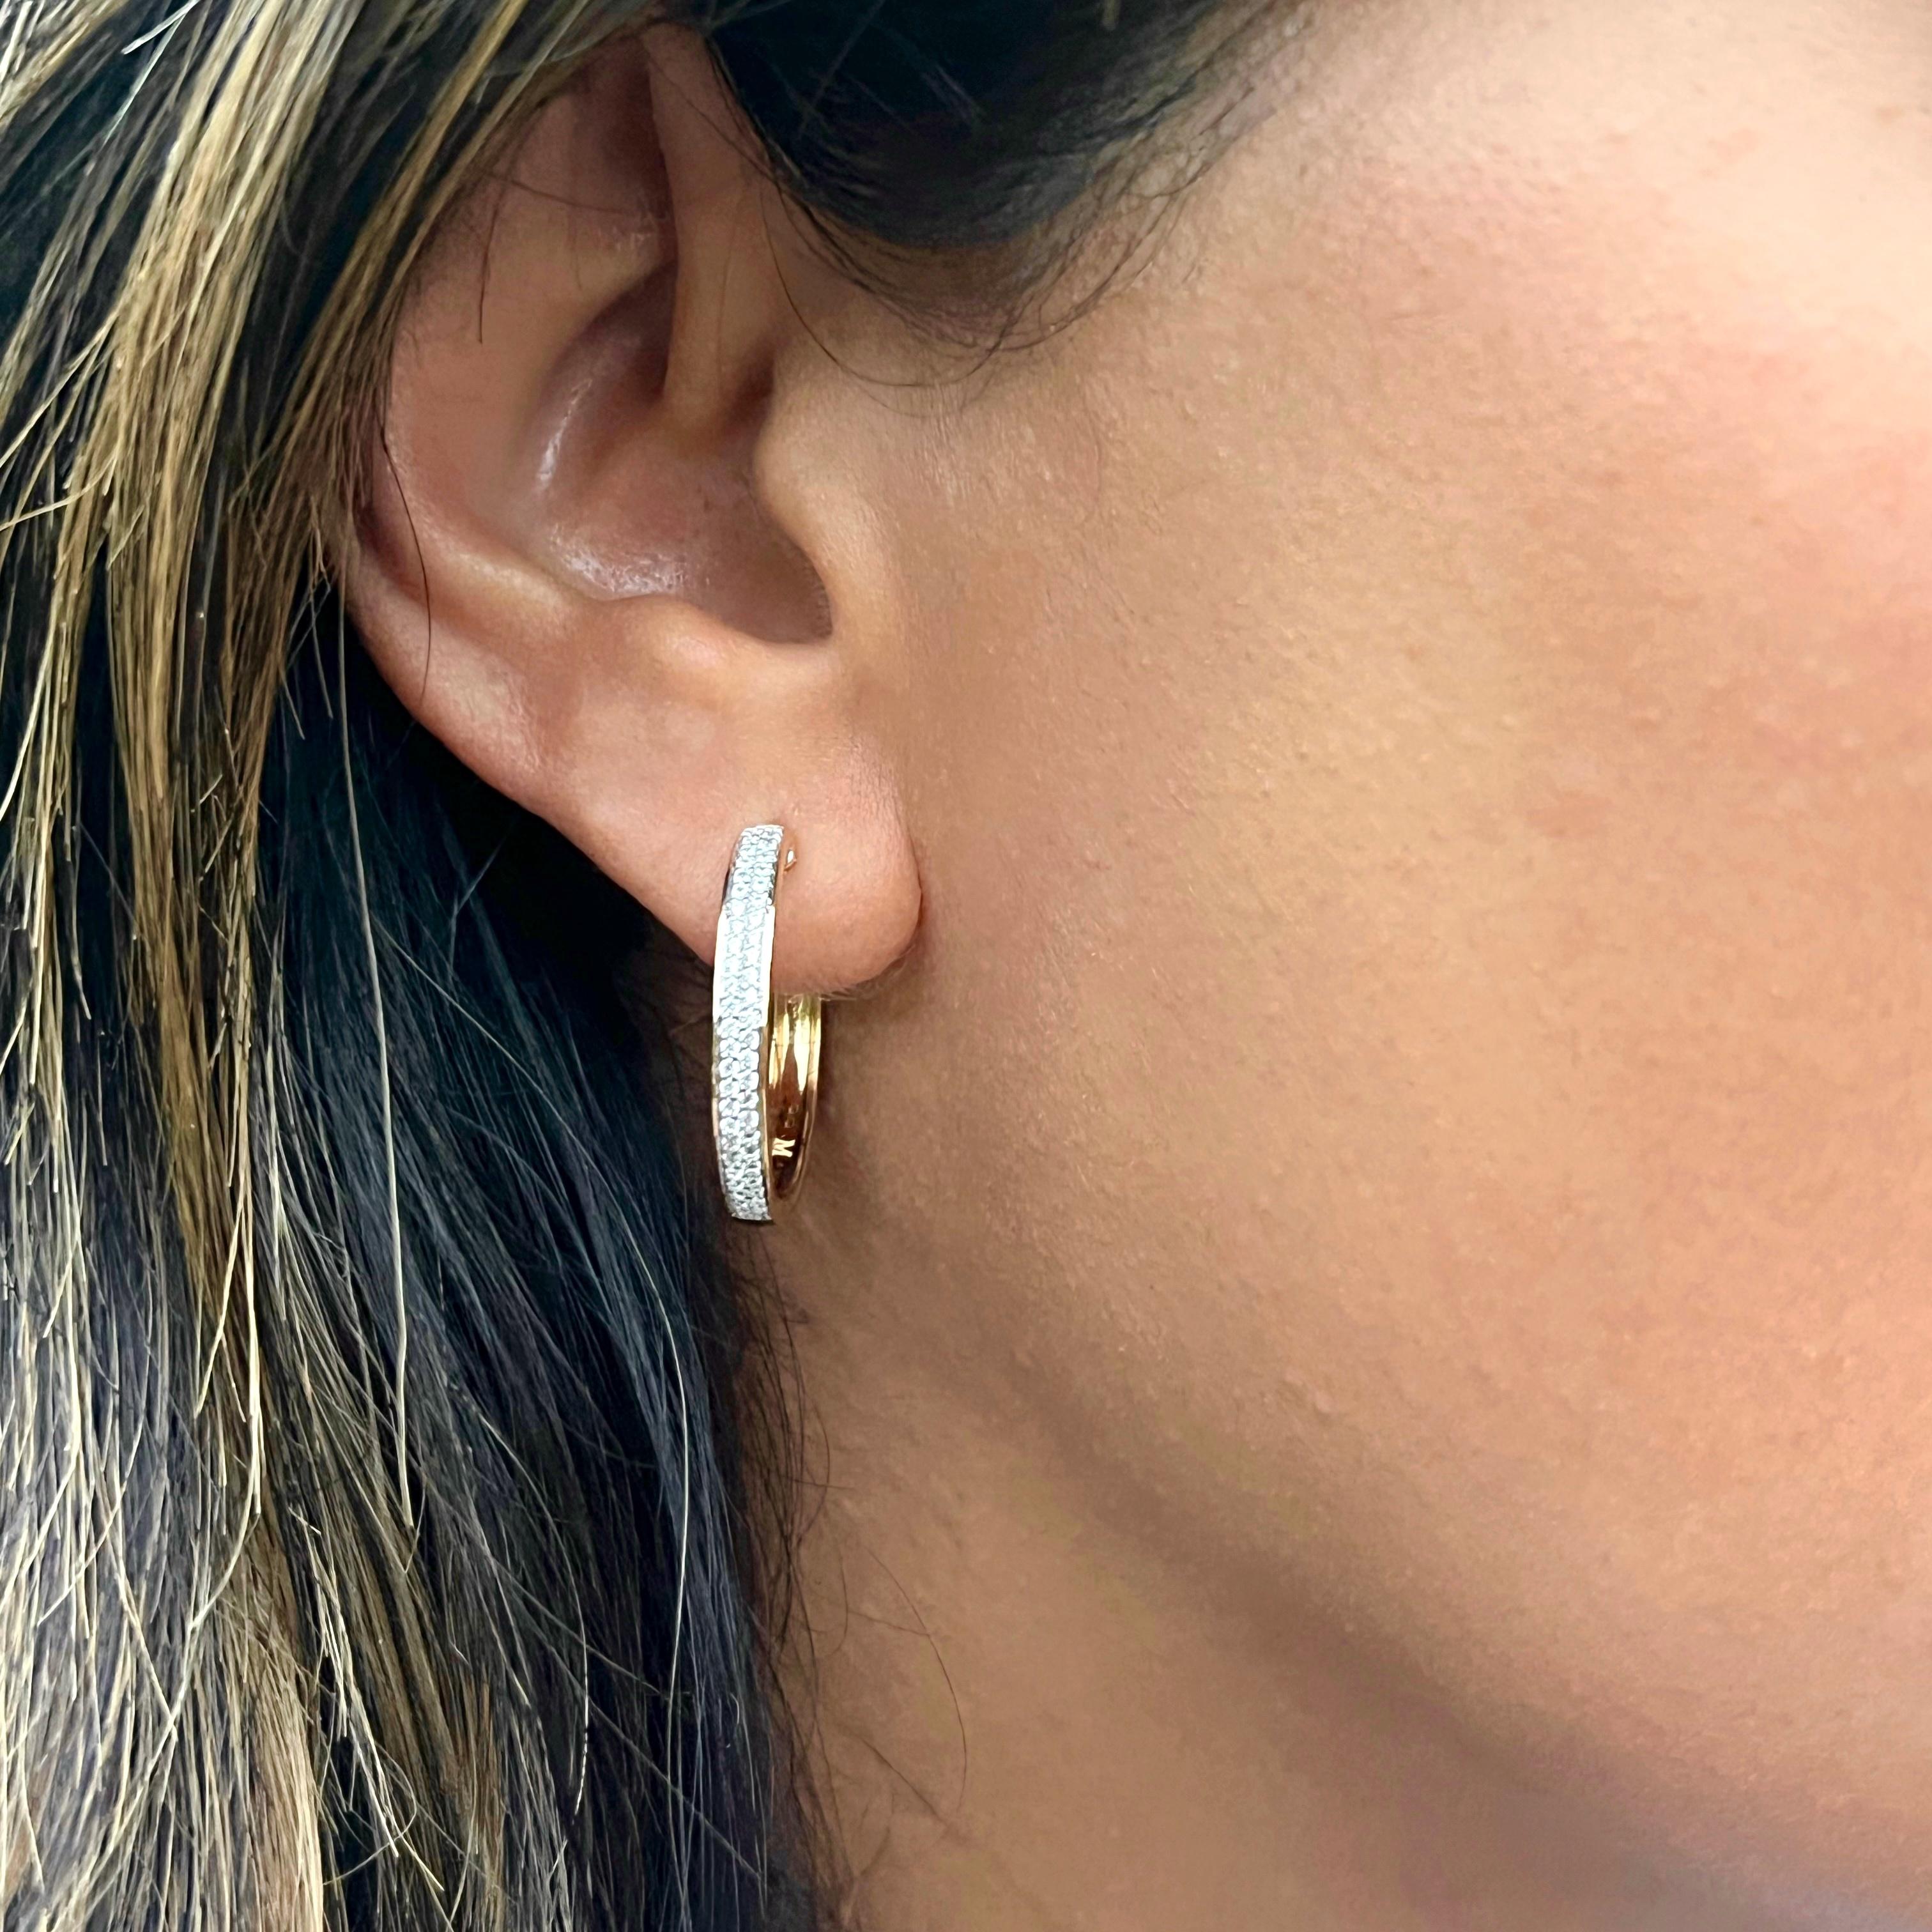 Elevate your everyday style with this diamond and 14k gold hoop earrings and huggies. As the perfect piece to wear every day, these hoops are an Essential for your jewelry collection. The hoops feature two rows of diamonds that give an extra sparkle